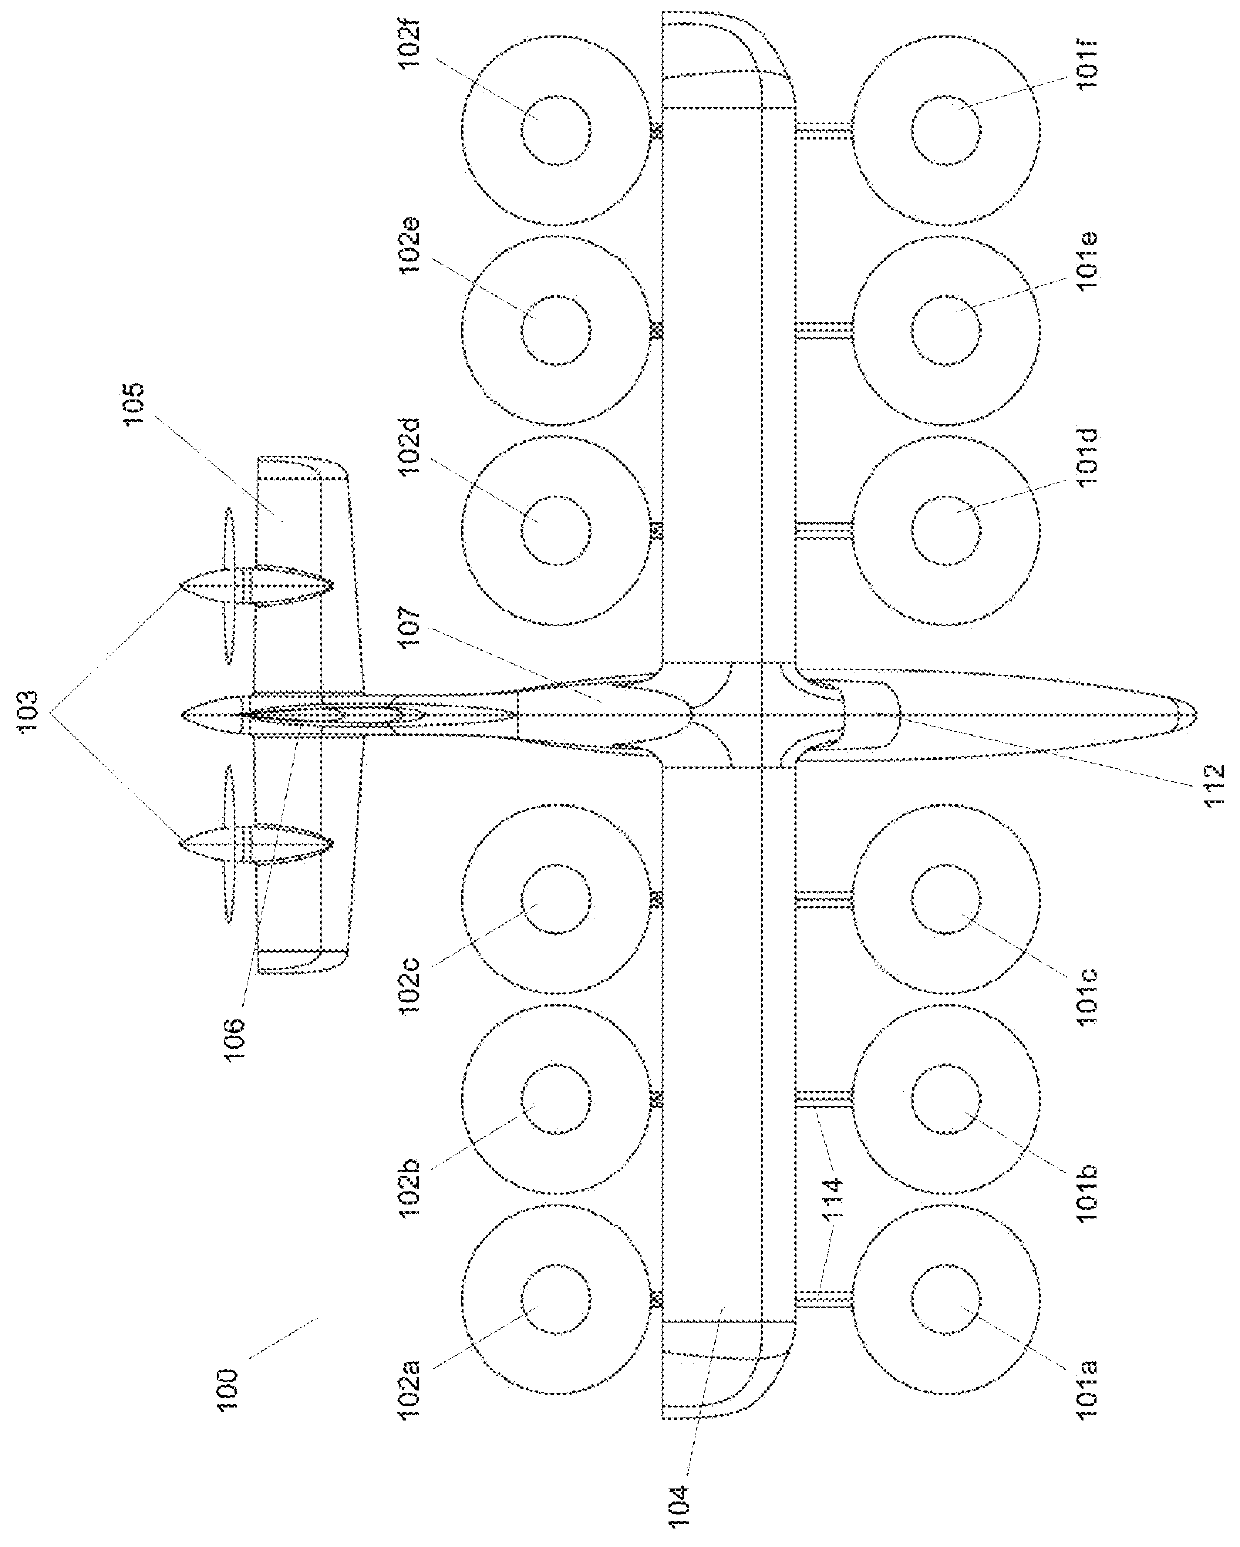 Ventilated rotor mounting boom for personal aircraft